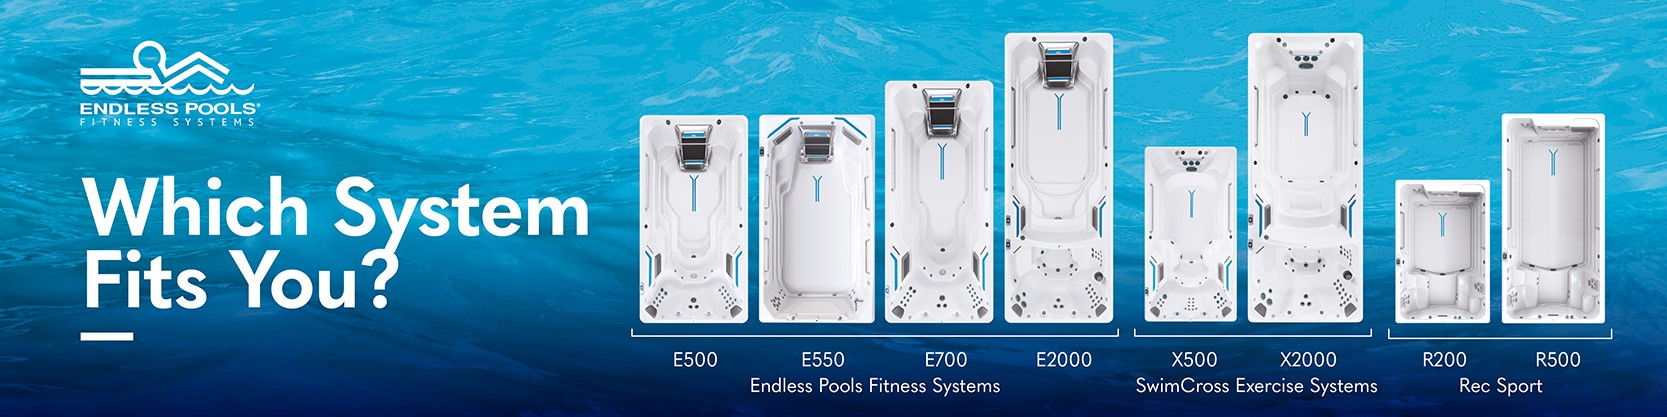 Endless Pools Which System Fits You